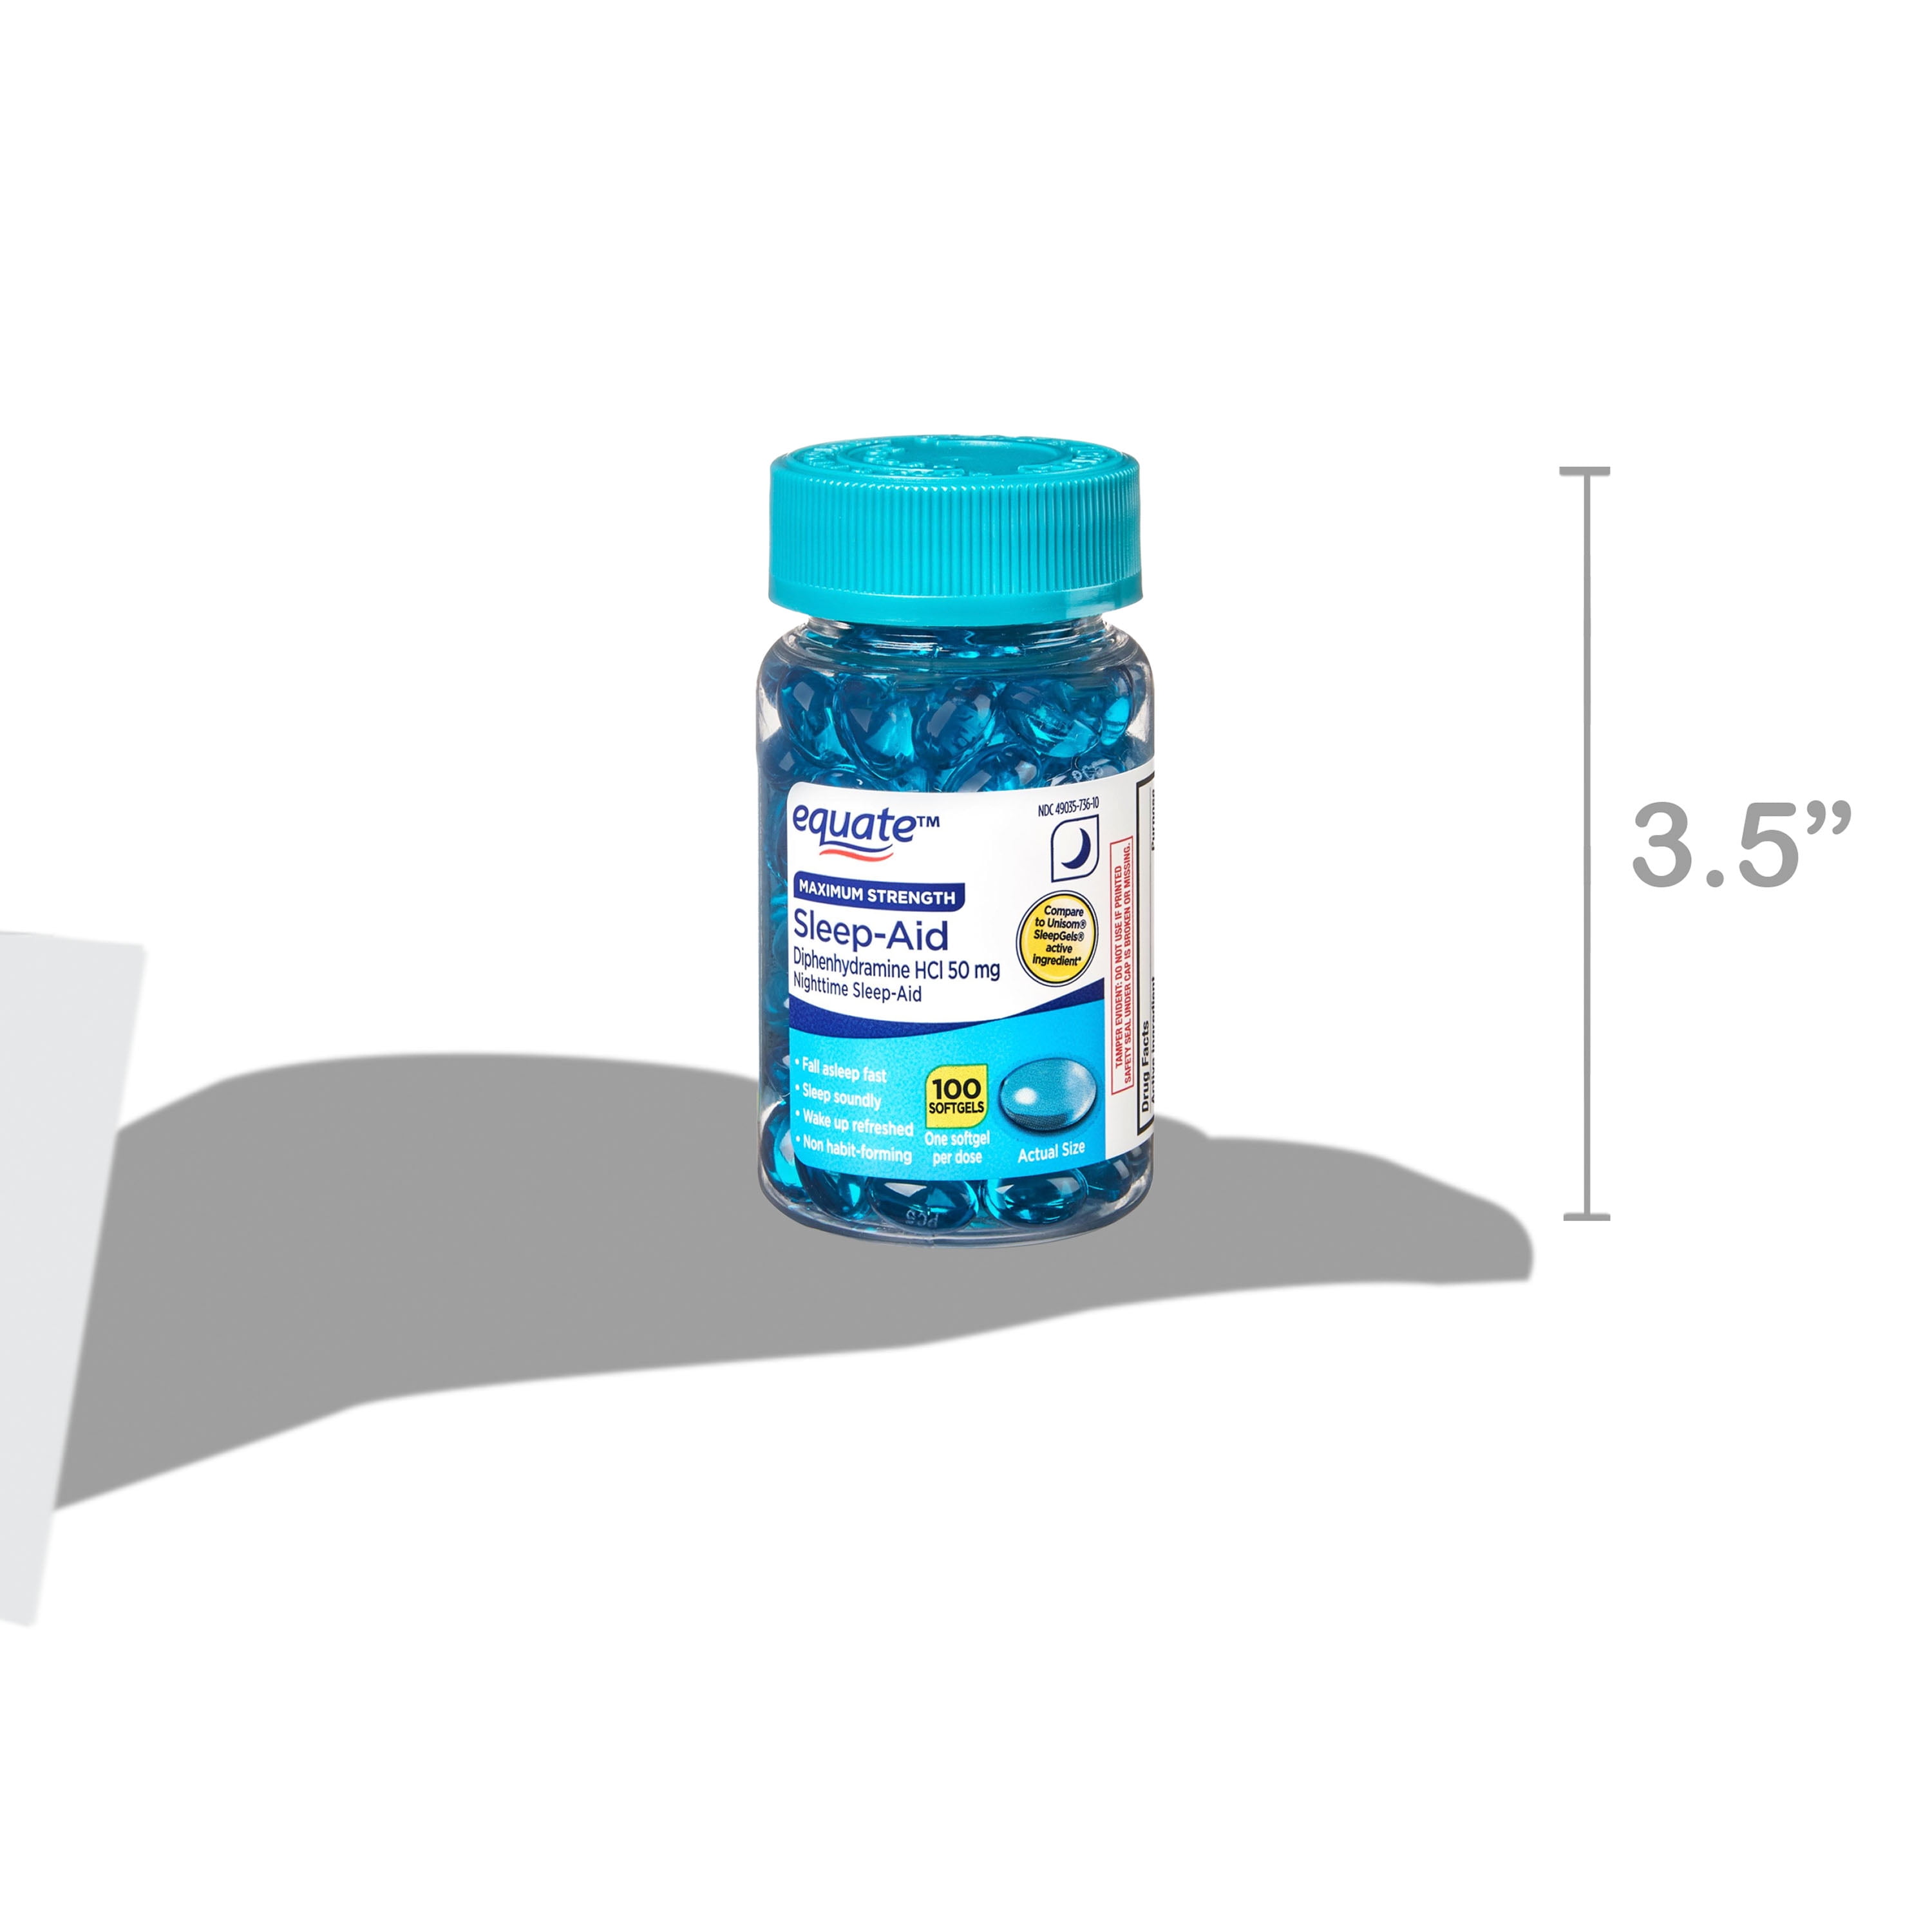 Equate Aide-sommeil 50 mg20 caplets 